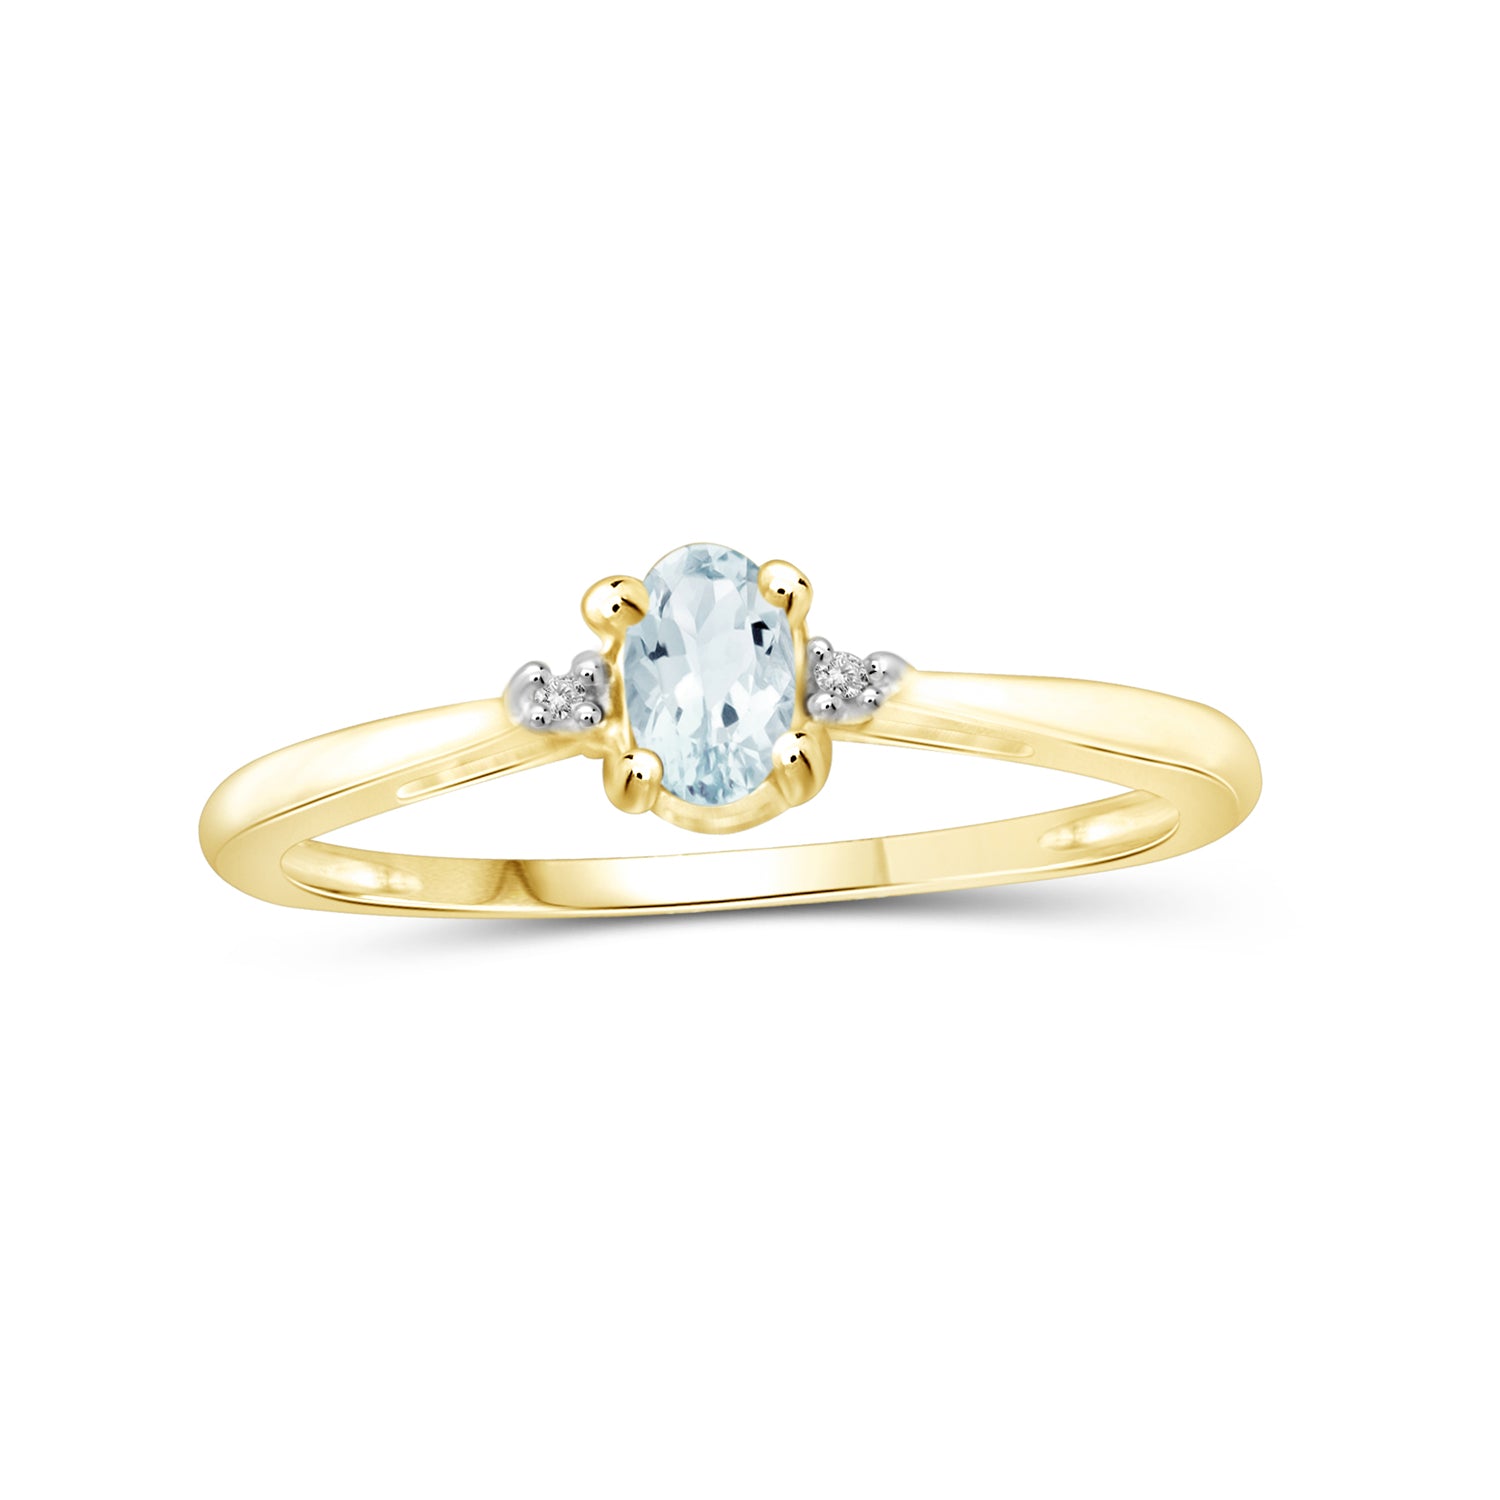 Aquamarine Ring Birthstone Jewelry – 0.20 Carat Aquamarine 14K Gold-Plated Ring Jewelry with White Diamond Accent – Gemstone Rings with Hypoallergenic 14K Gold-Plated Band